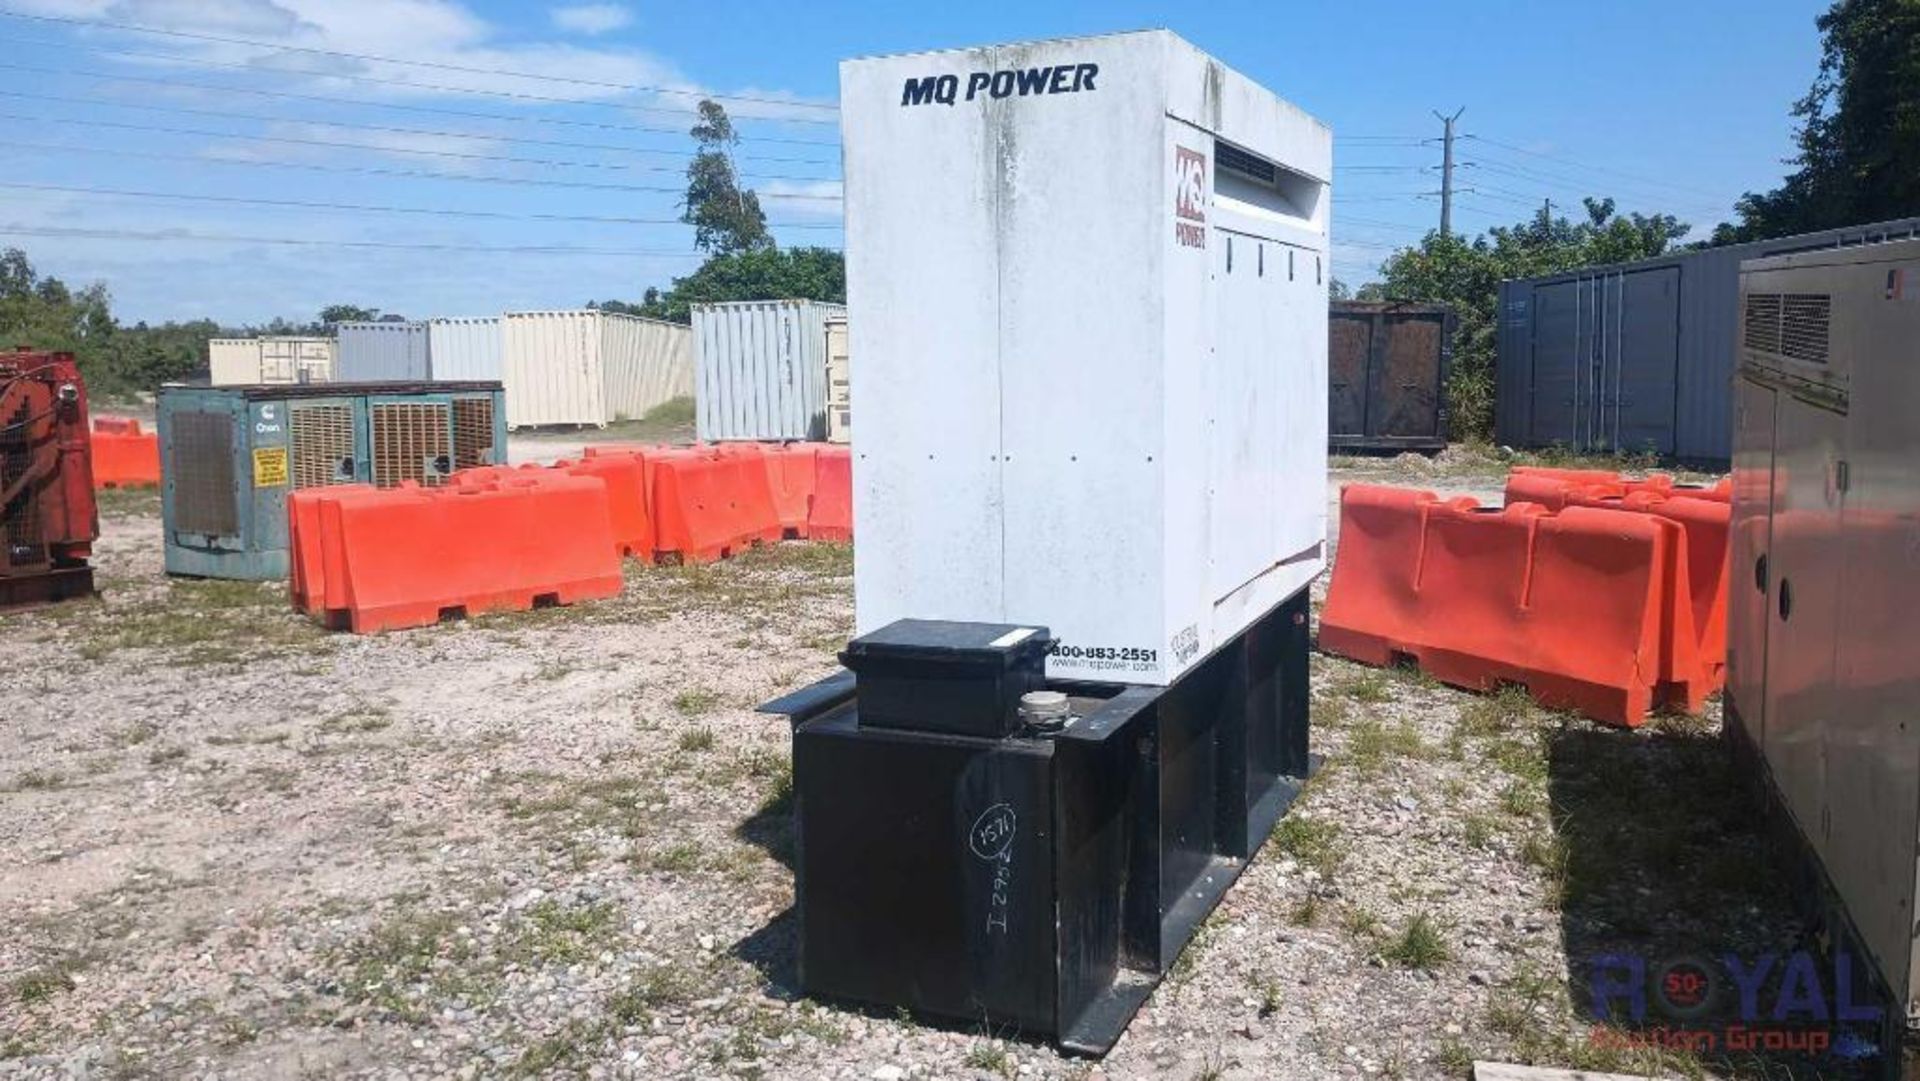 2006 MQP30D Stationary Diesel Generator w/ Fuel Tank - Image 2 of 11